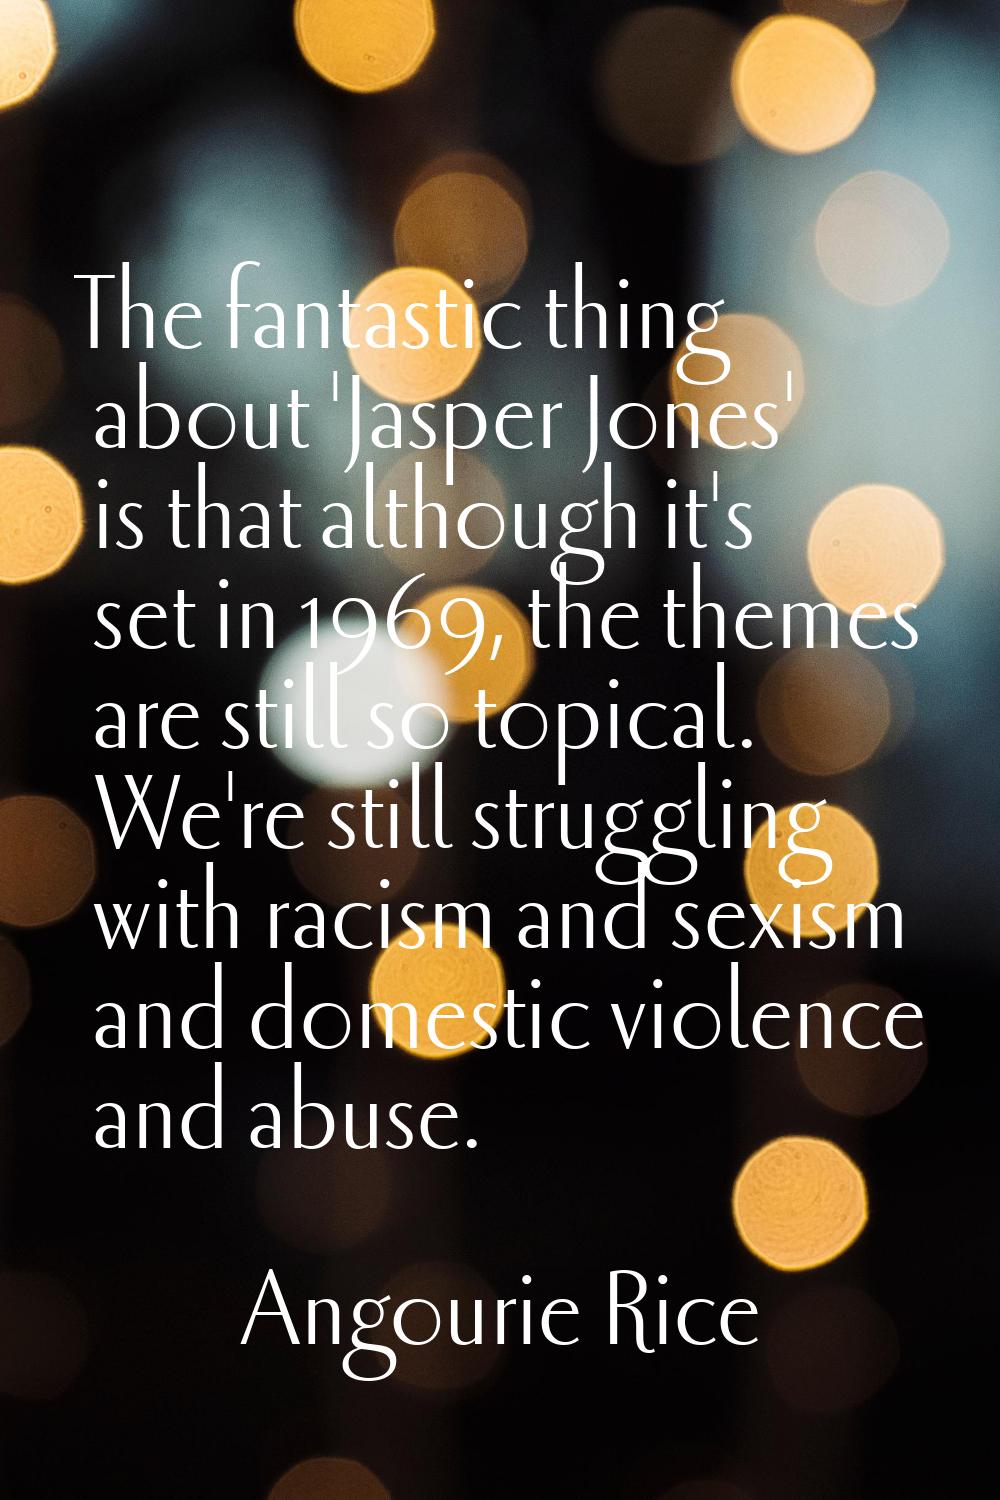 The fantastic thing about 'Jasper Jones' is that although it's set in 1969, the themes are still so